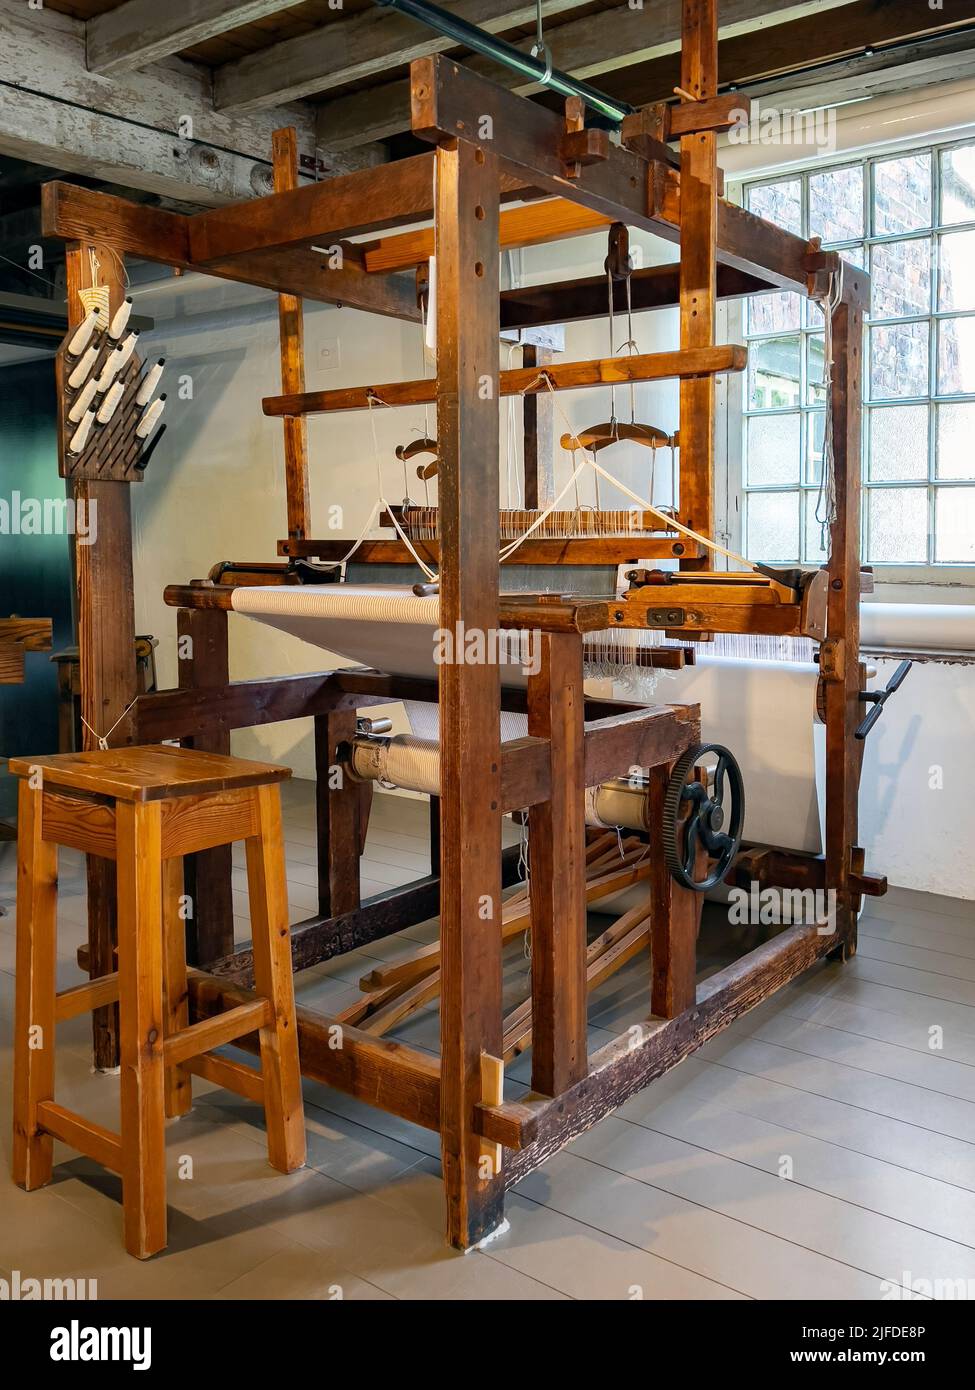 A simple hand-operated loom. A loom is a device used to weave cloth and tapestry. The basic purpose of any loom is to hold the warp threads under tens Stock Photo